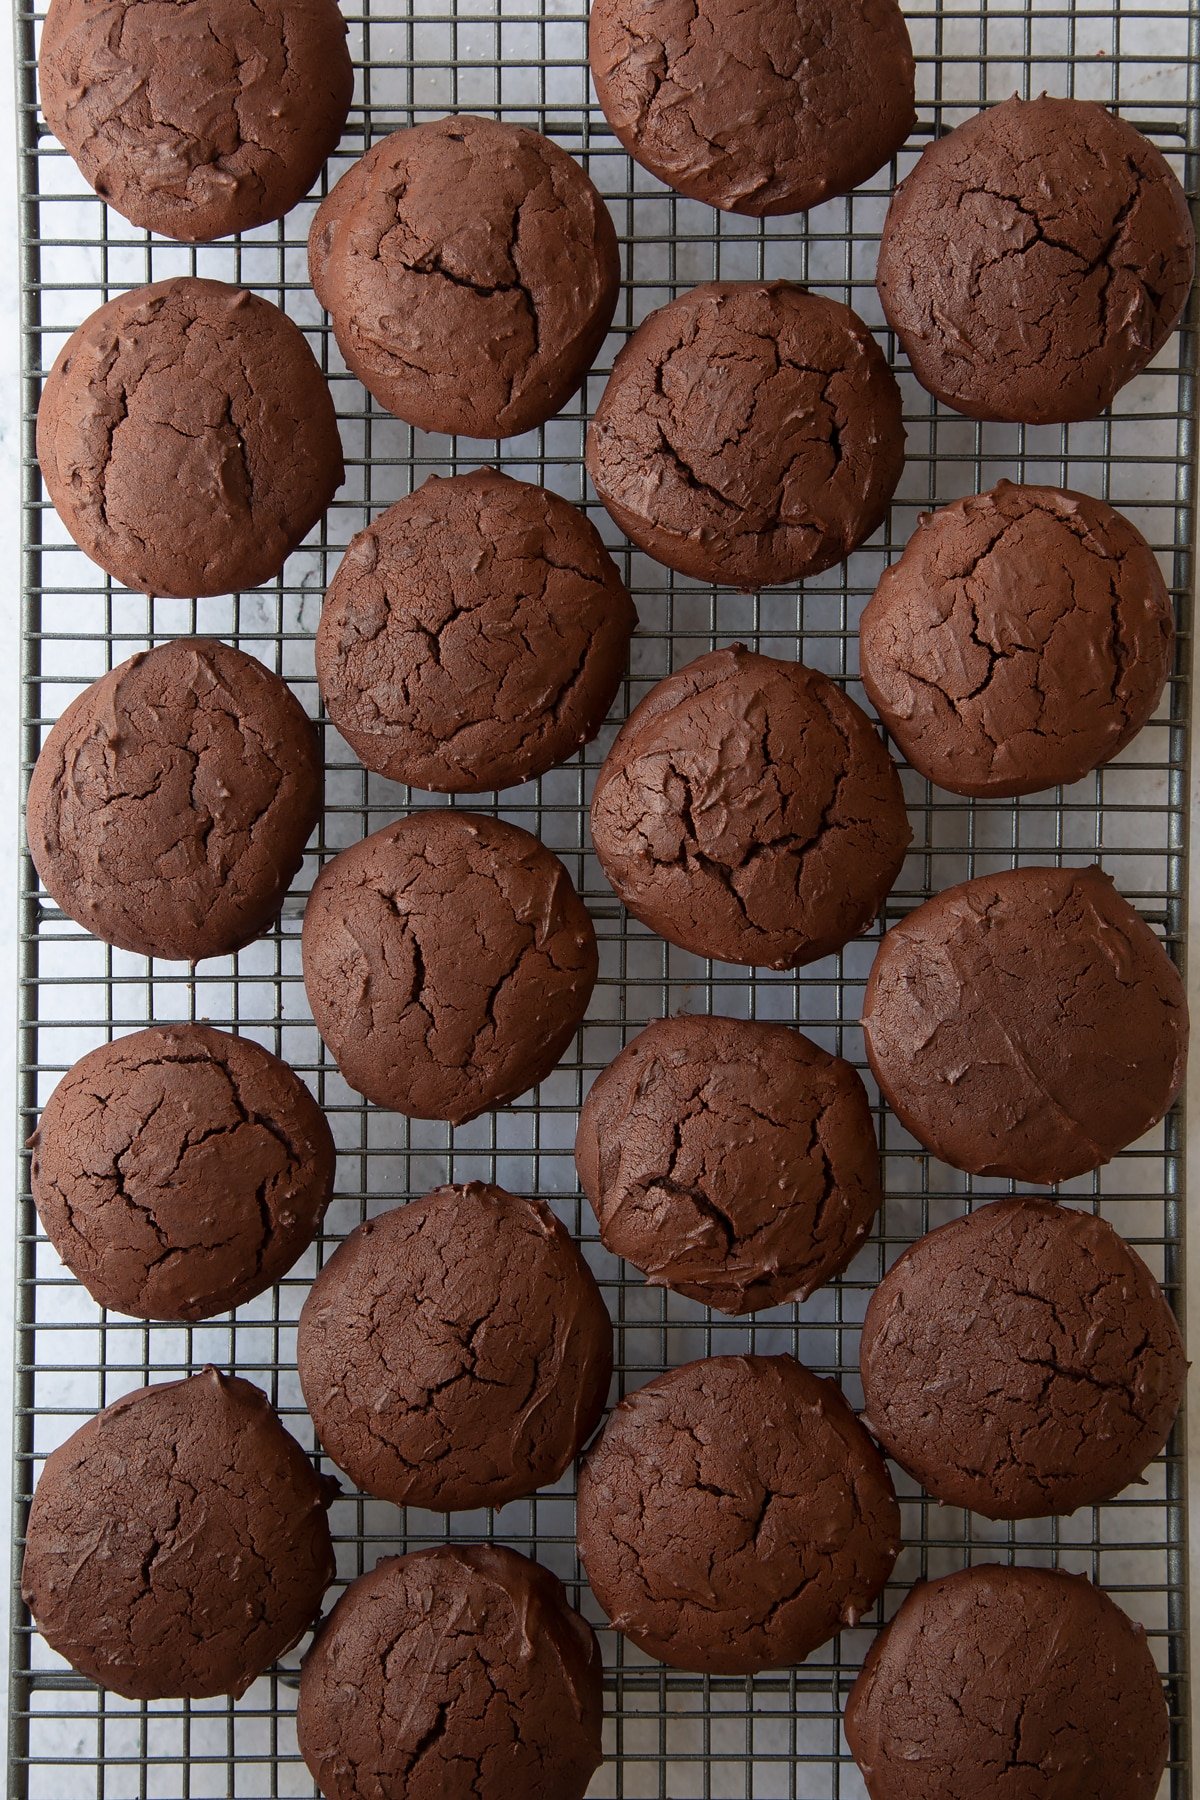 a wire cooling rack covered in chocolate whoopie pie cookies.